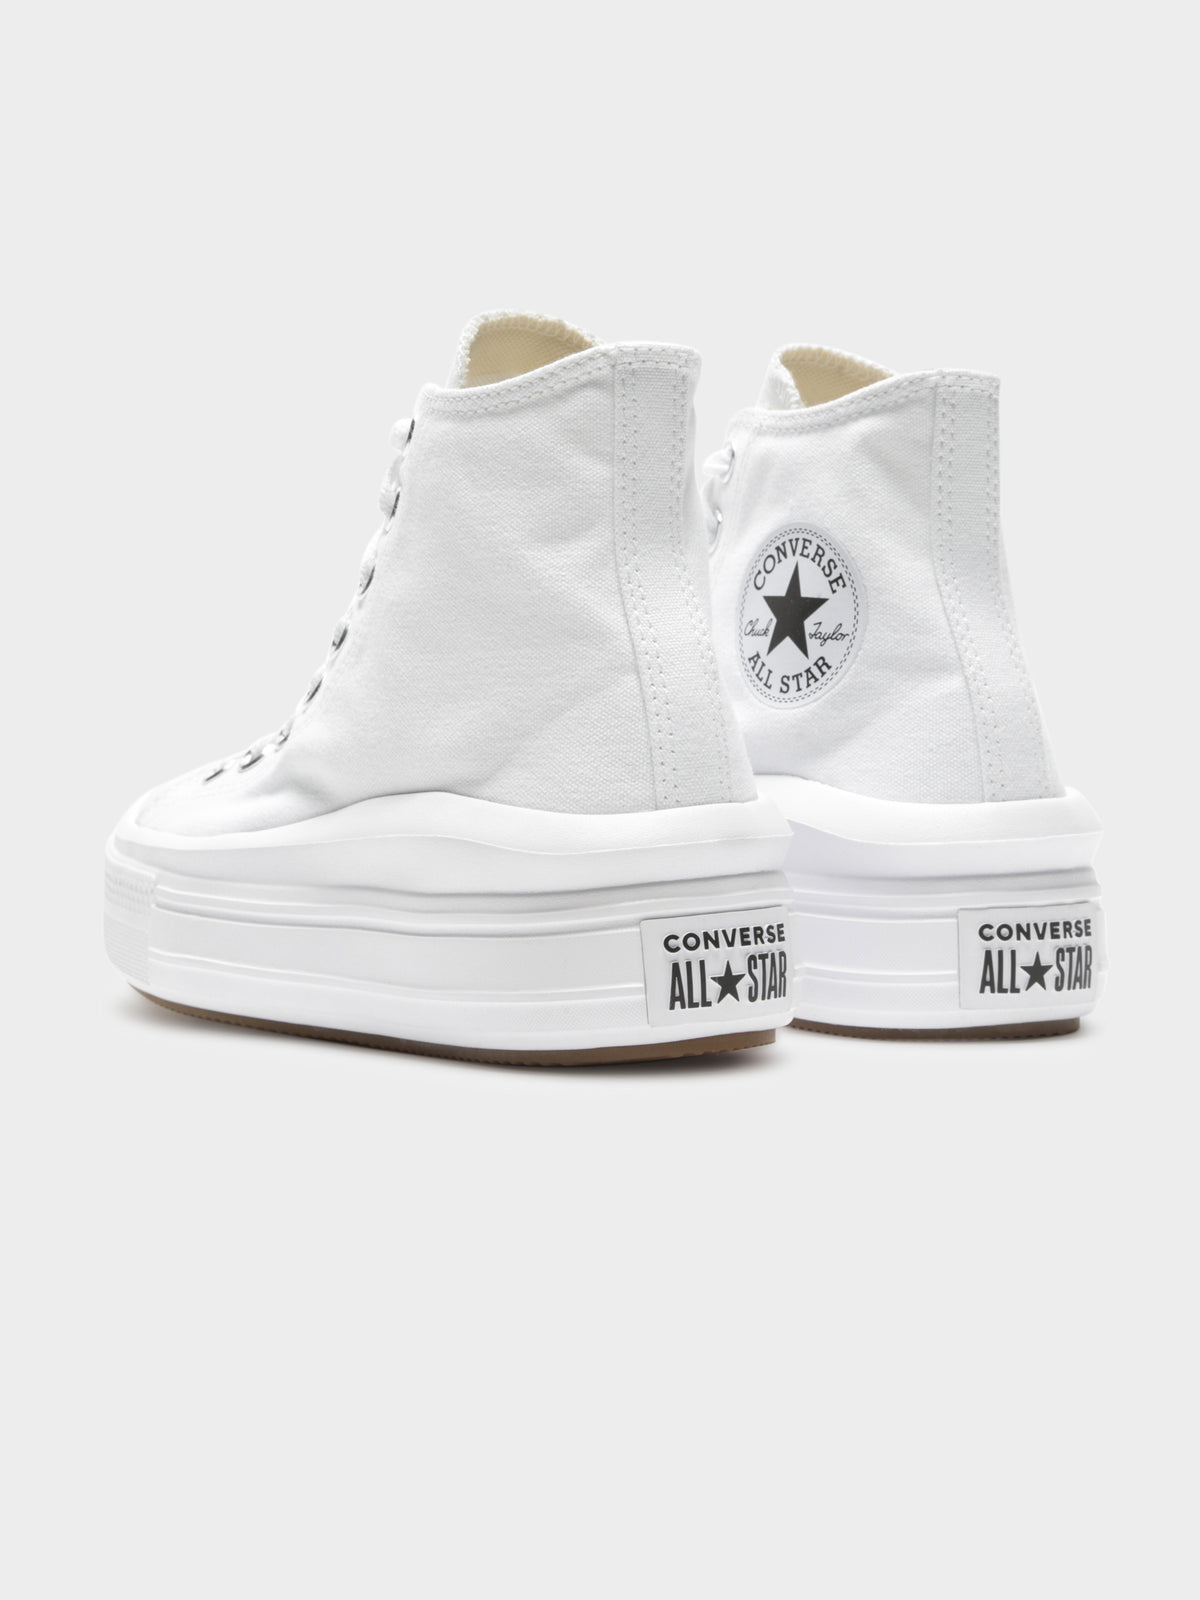 Womens Chuck Taylor Move Platform High Top Sneakers in All White